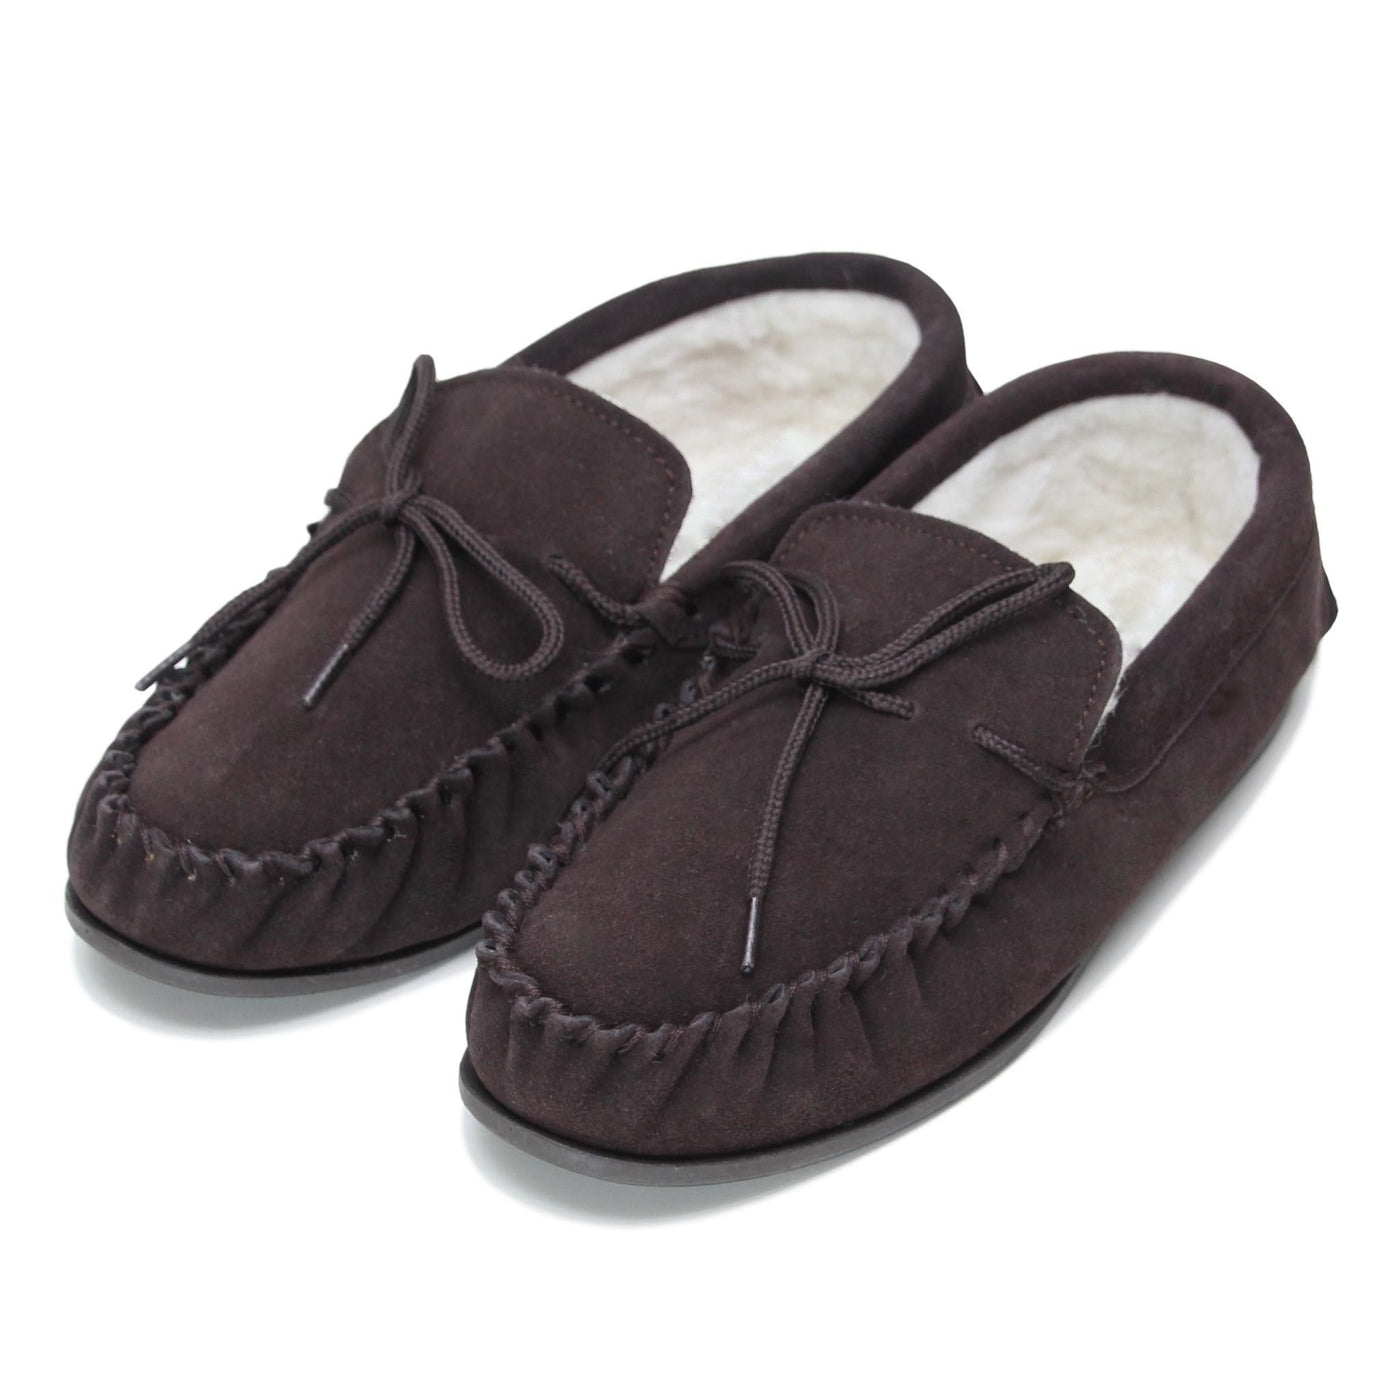 lambswool moccasins